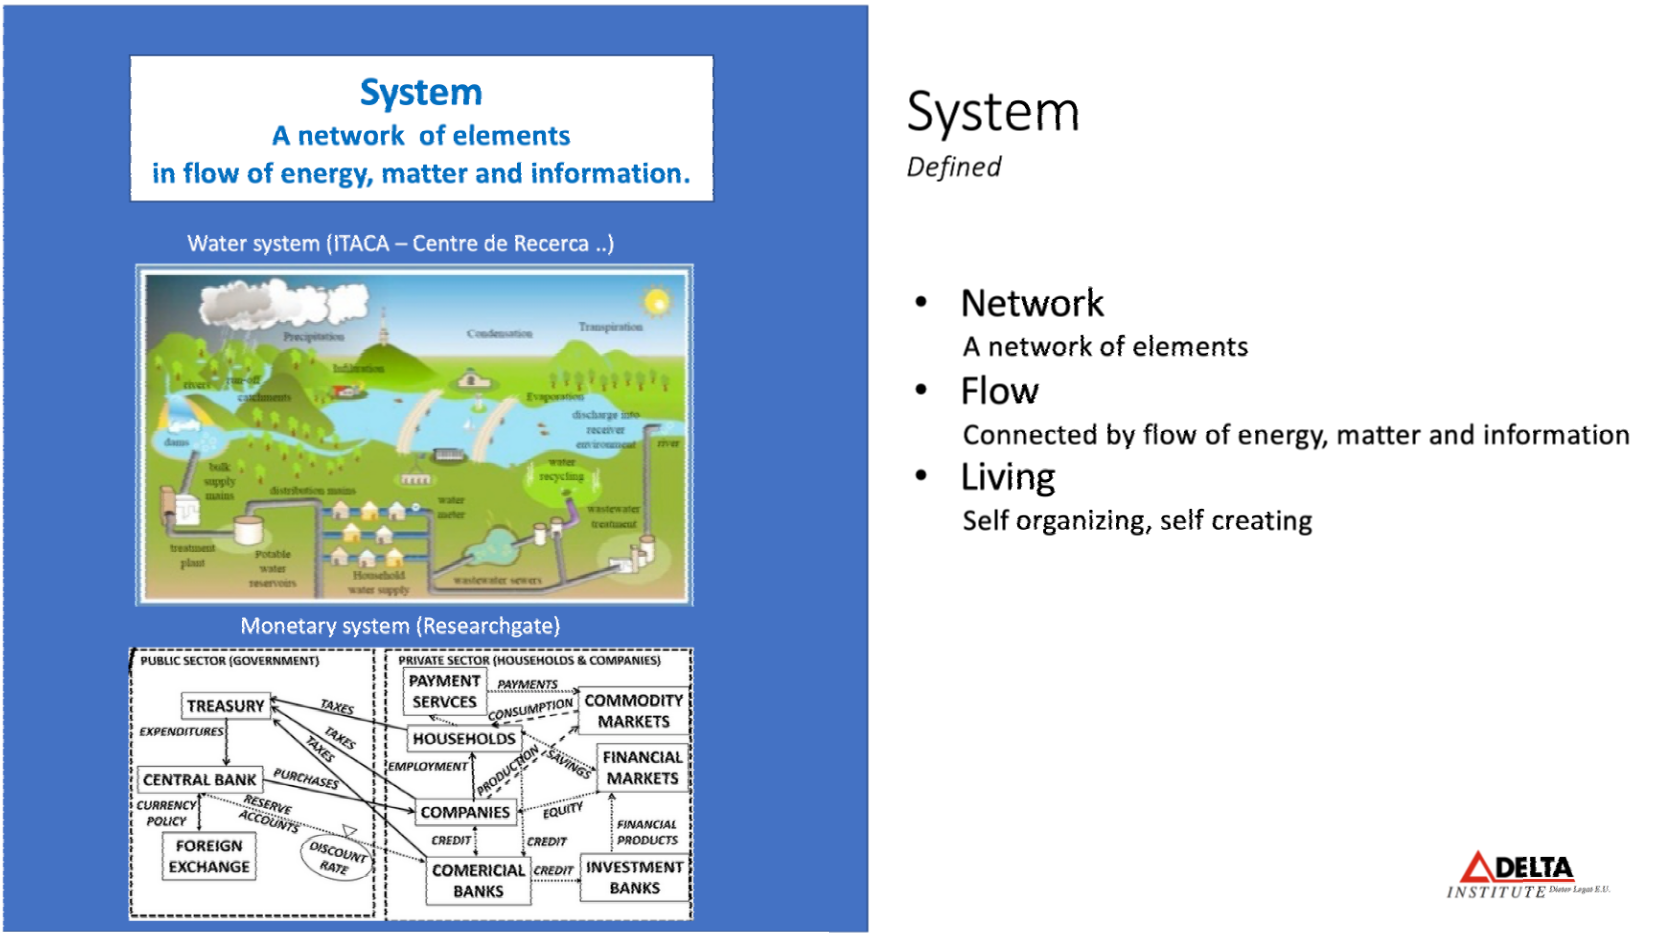 The Law of Sustainability by Lietaer - What are Systems?